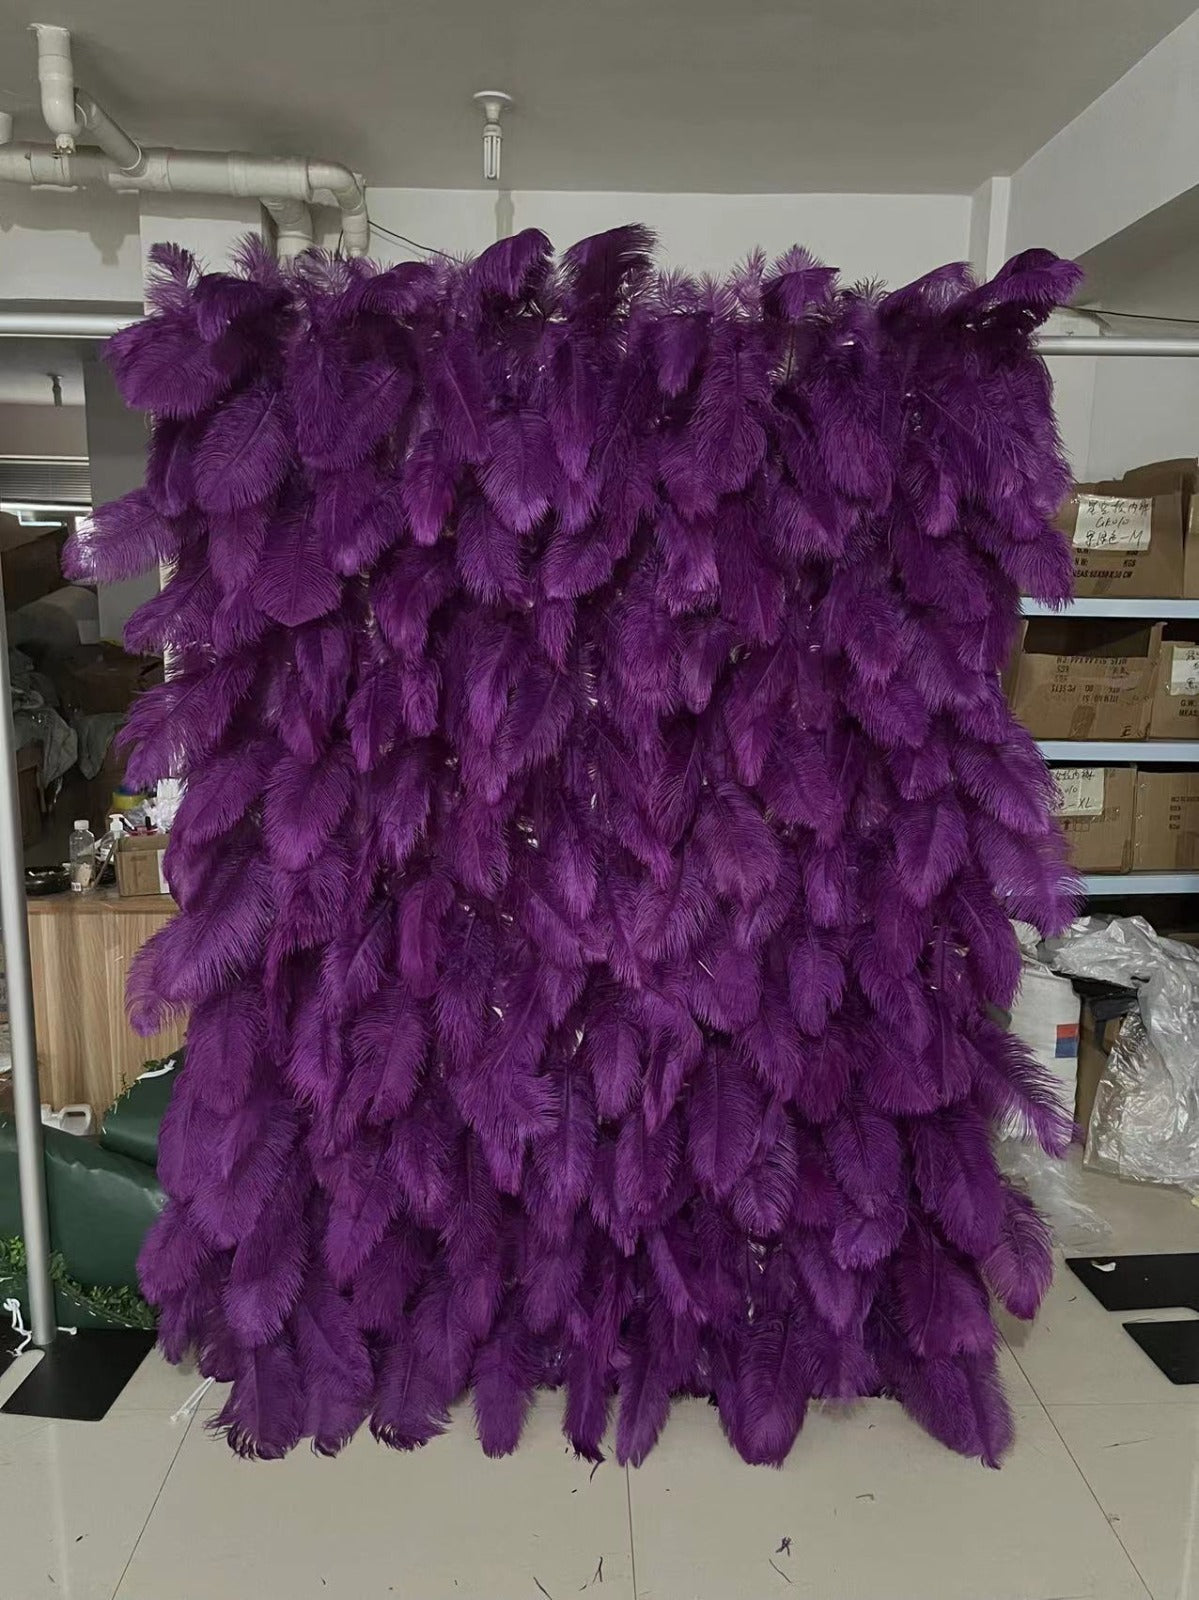 5D Luxury Royal Purple Feather Wall - Cloth Backed